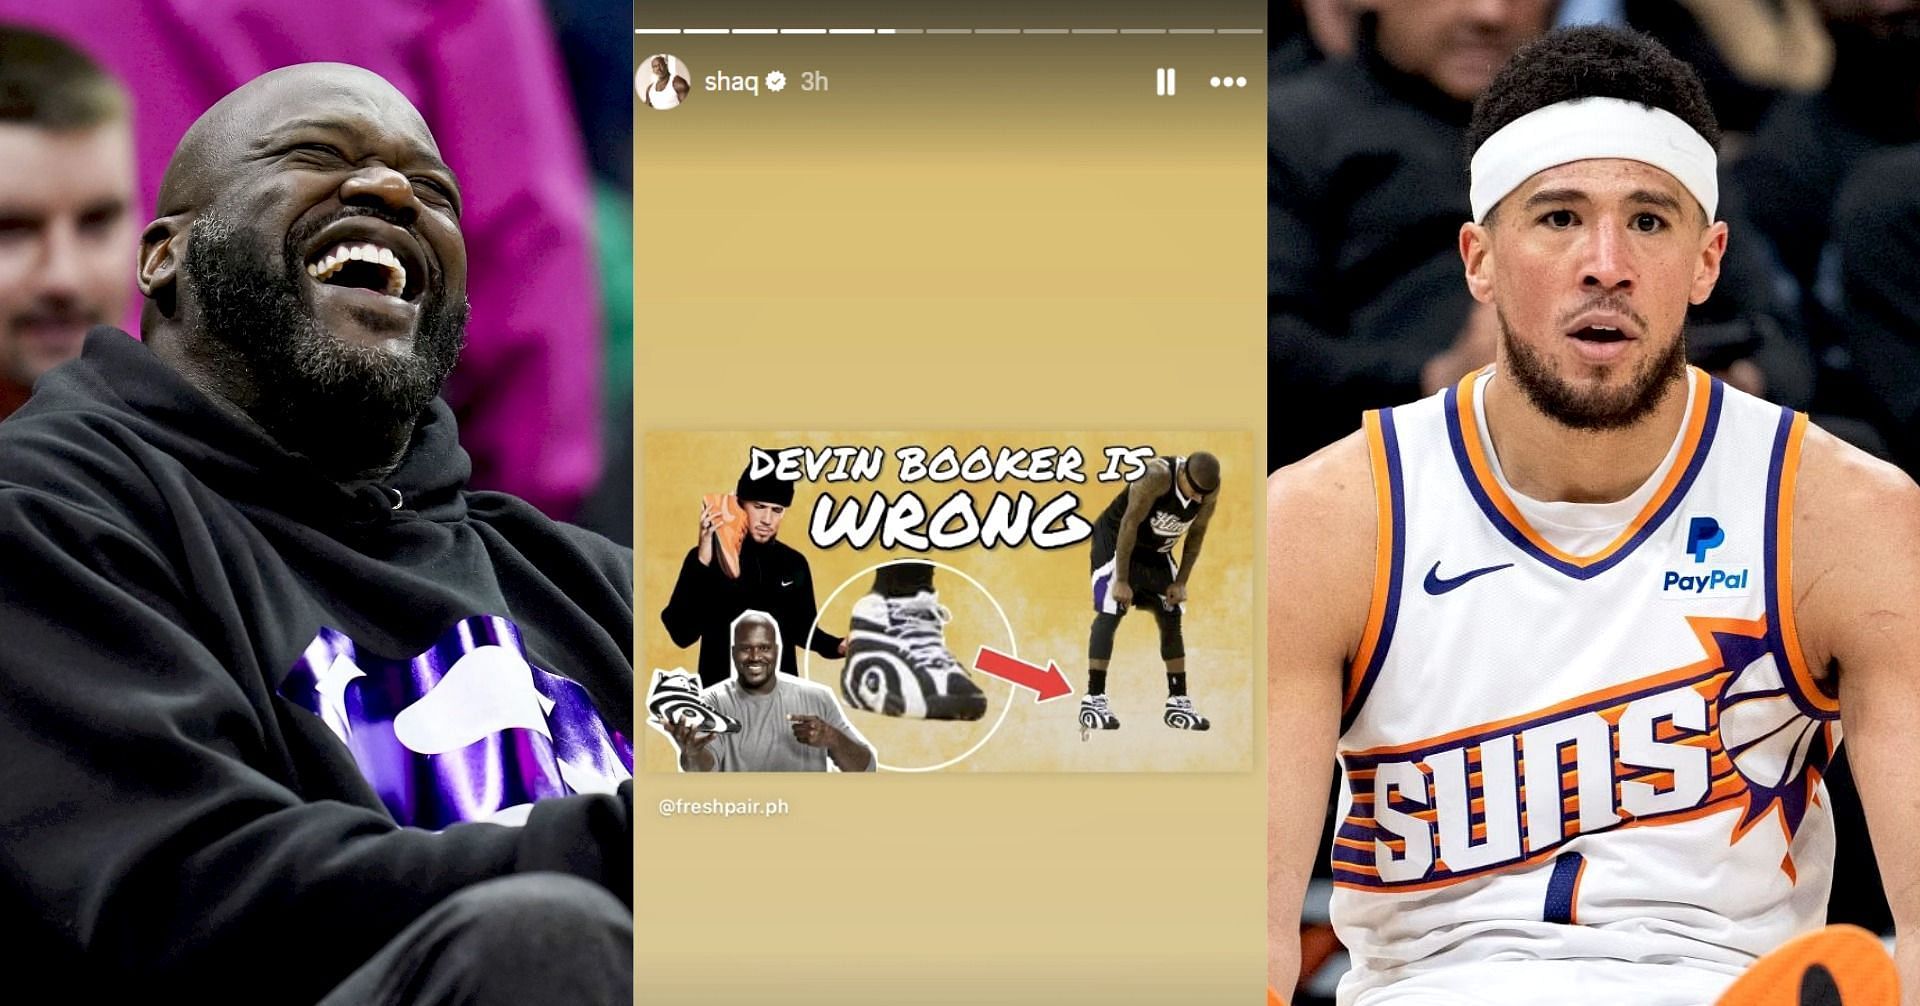 Shaquille O&rsquo;Neal seemingly claps back at Devin Booker&rsquo;s sneaker shade